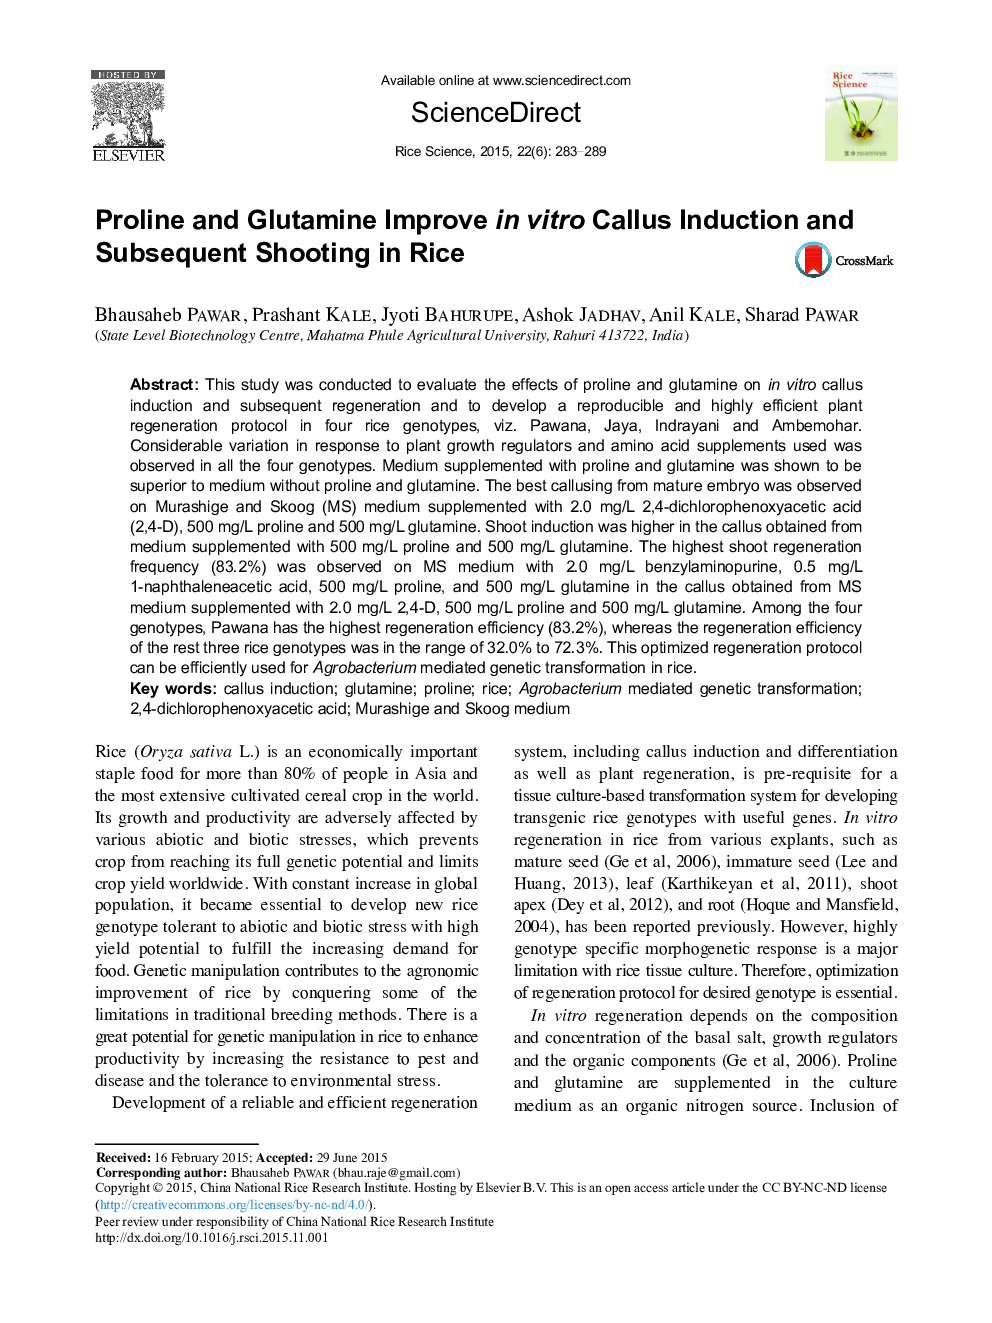 Proline and Glutamine Improve in vitro Callus Induction and Subsequent Shooting in Rice 